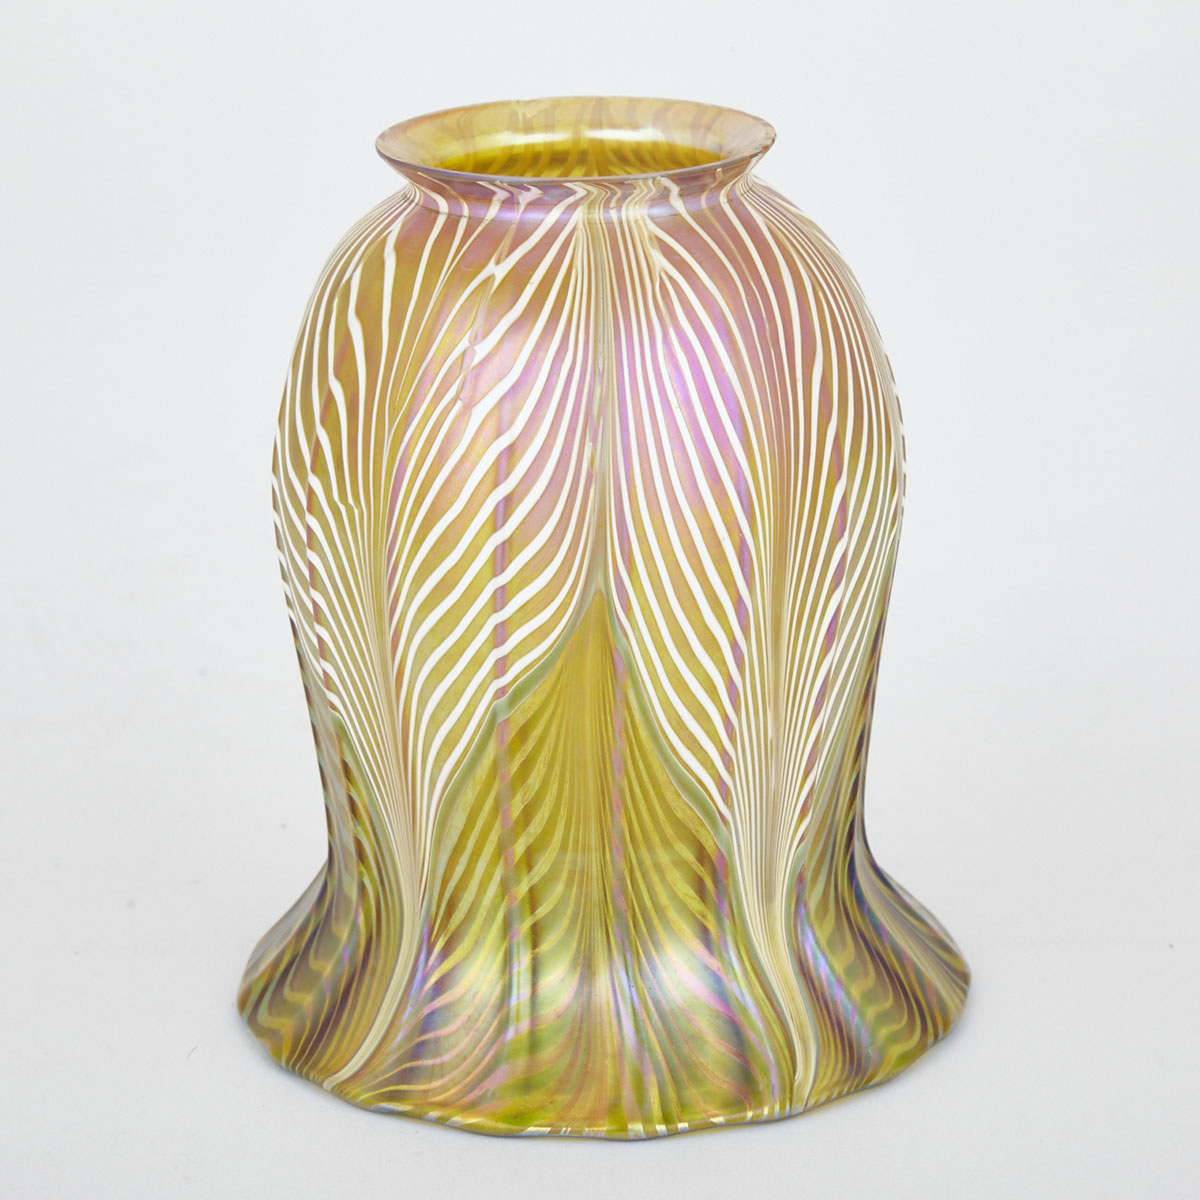 Quezal Decorated Iridescent Glass Shade, early 20th century